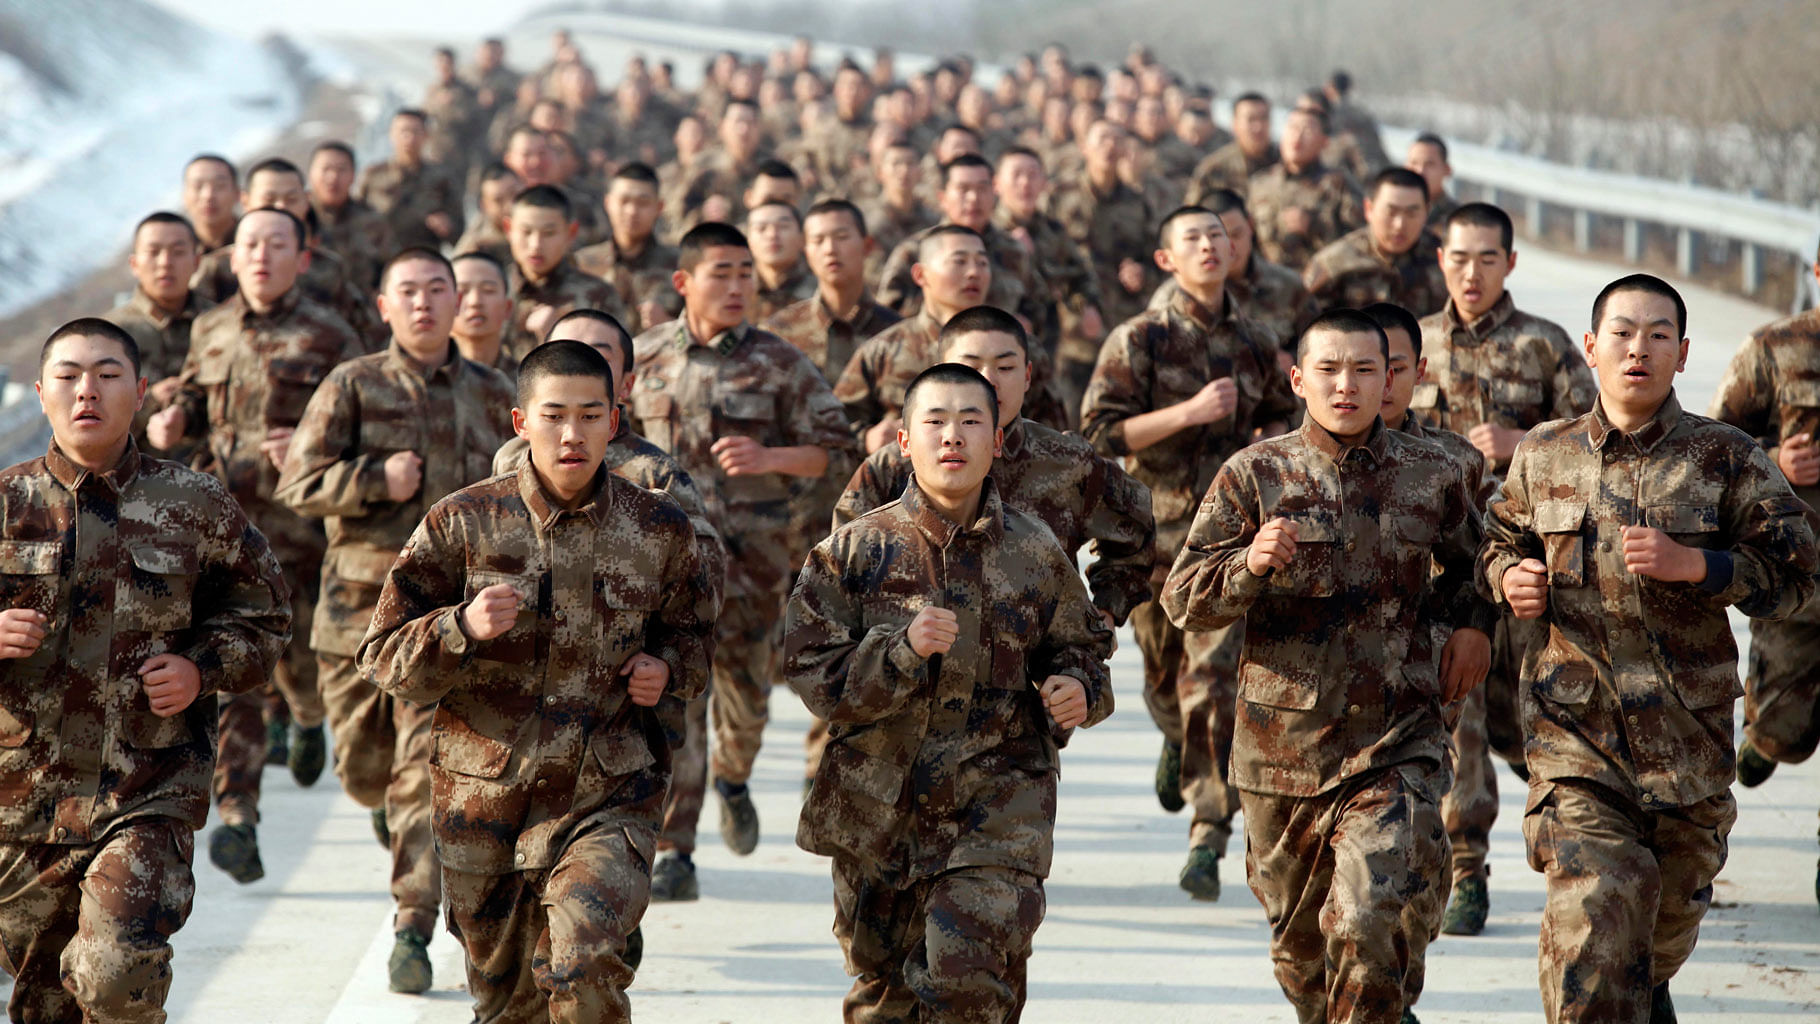 The world’s largest military force has been revamped to become ‘lean and mean’. (Photo: AP)